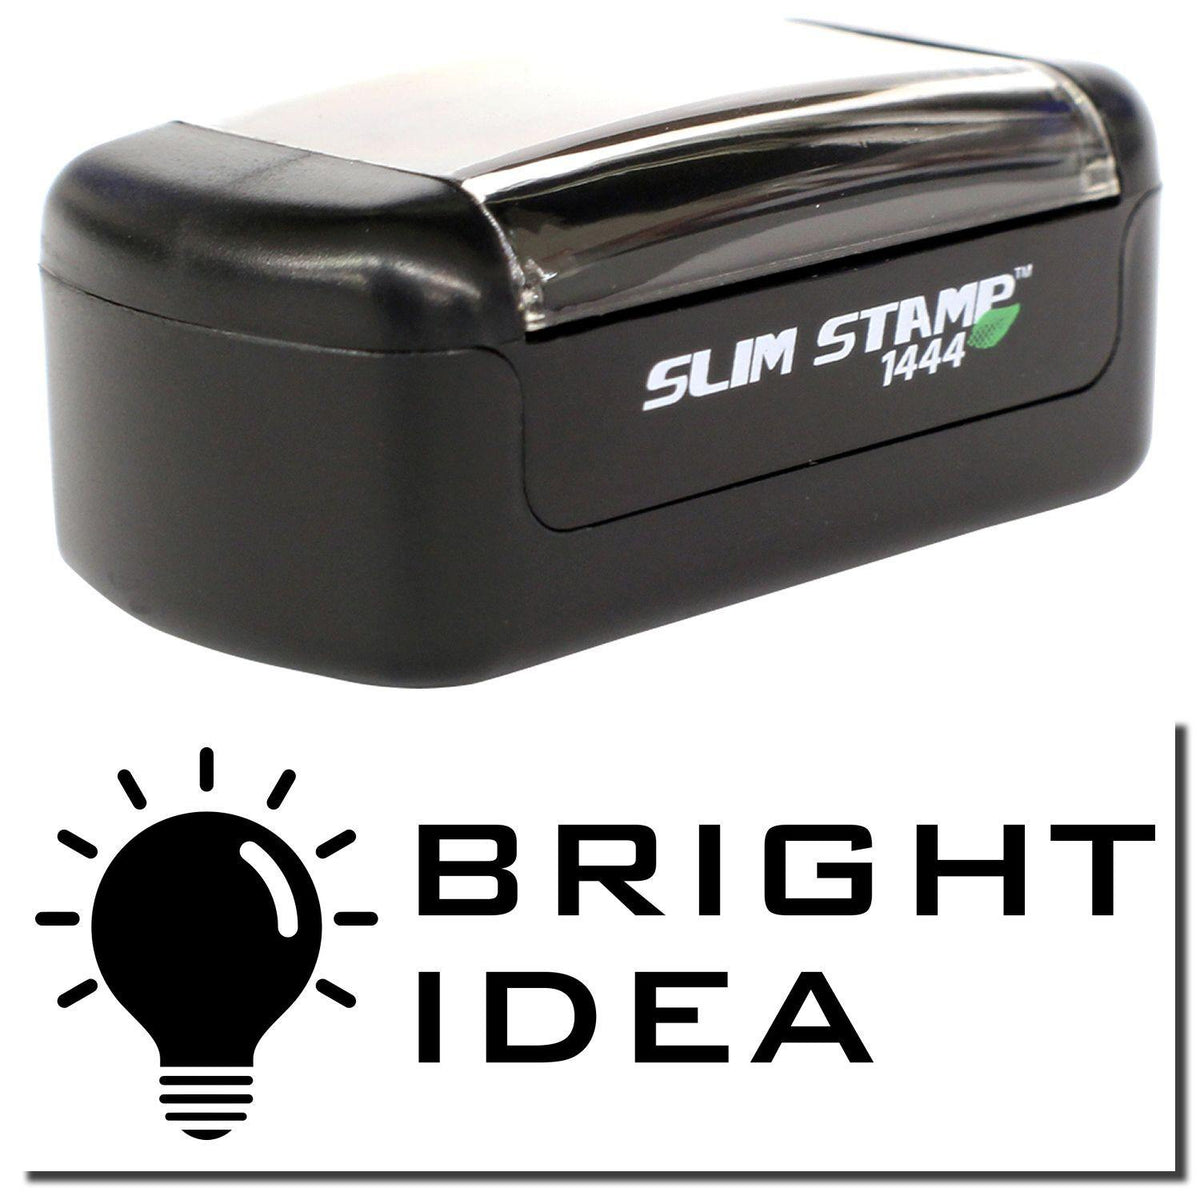 A stock office pre-inked stamp with a stamped image showing how the text &quot;BRIGHT IDEA&quot; in a tech-style font with an image of a bright lightbulb on the left is displayed after stamping.